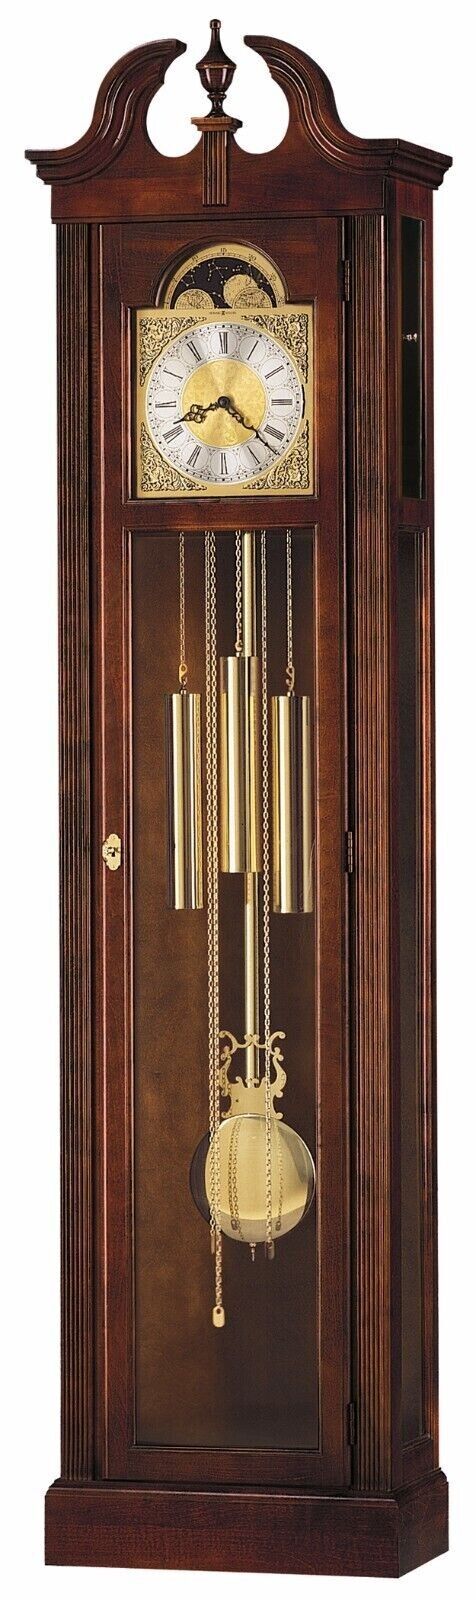 Howard Miller Chateau Grandfather Clock 610-520  New In Box